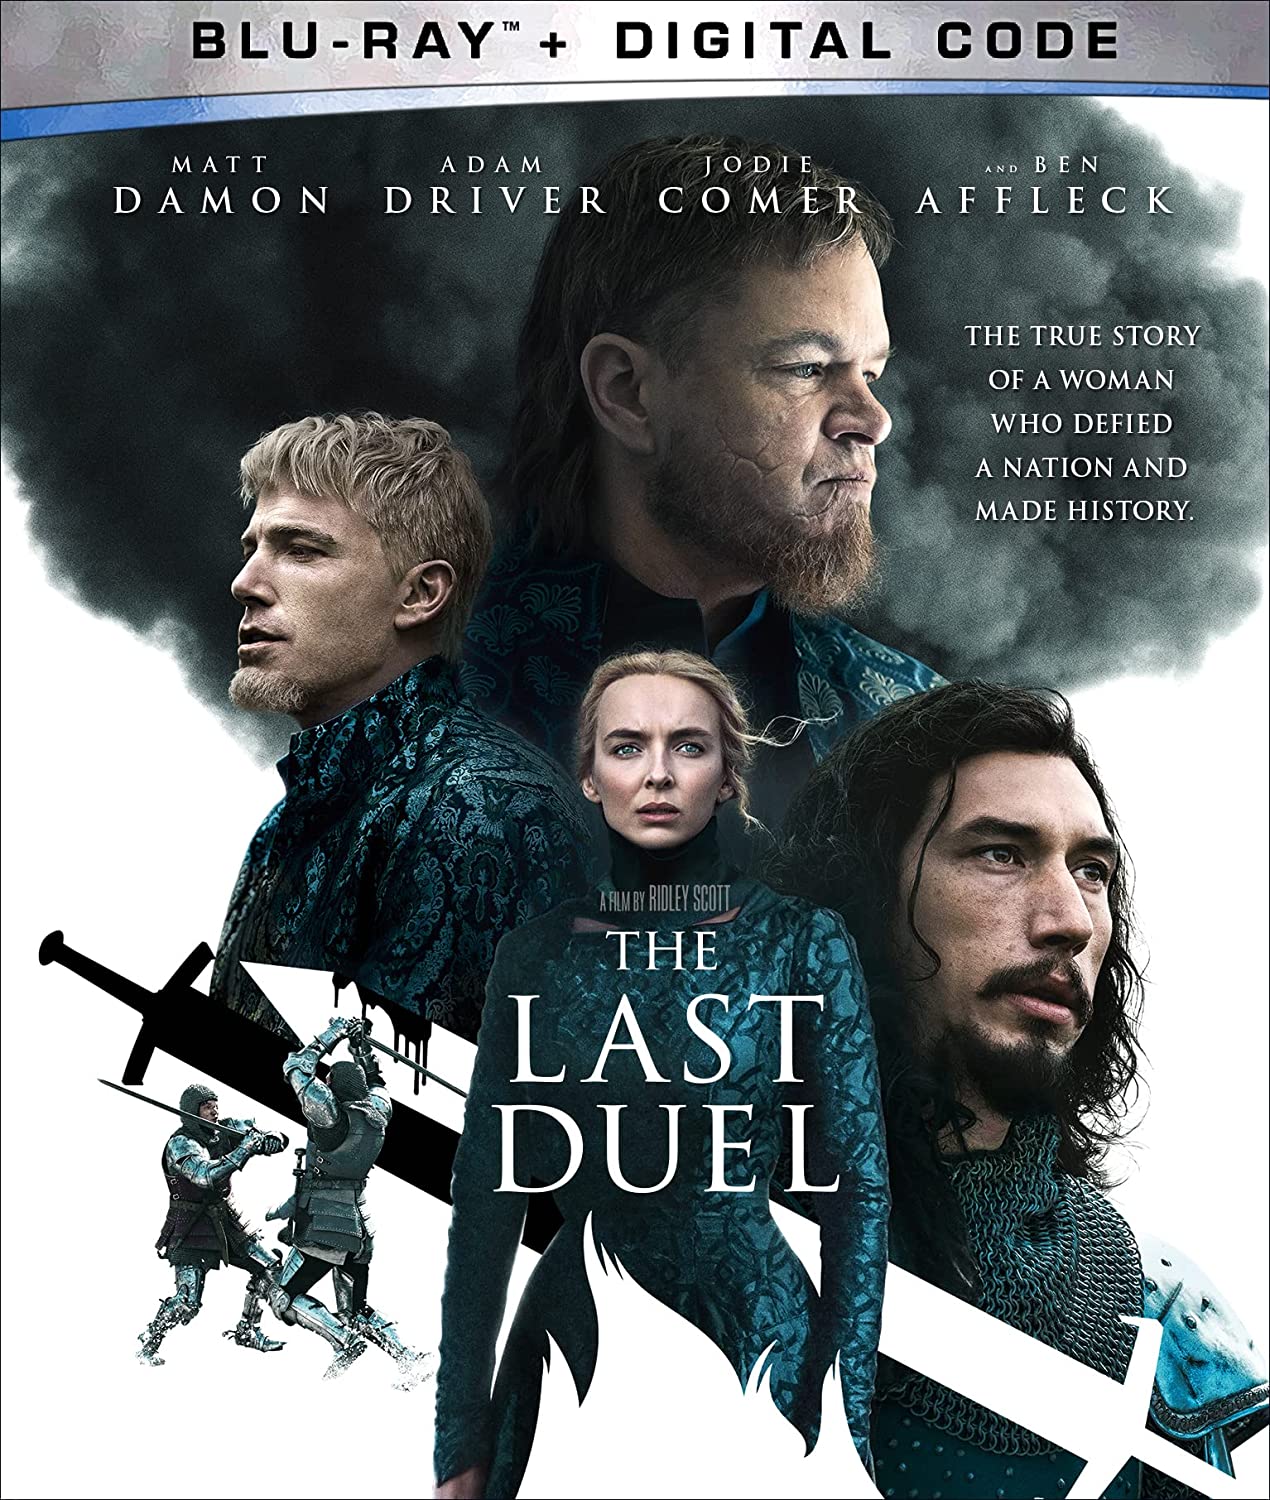 The Last Duel Blu-ray front